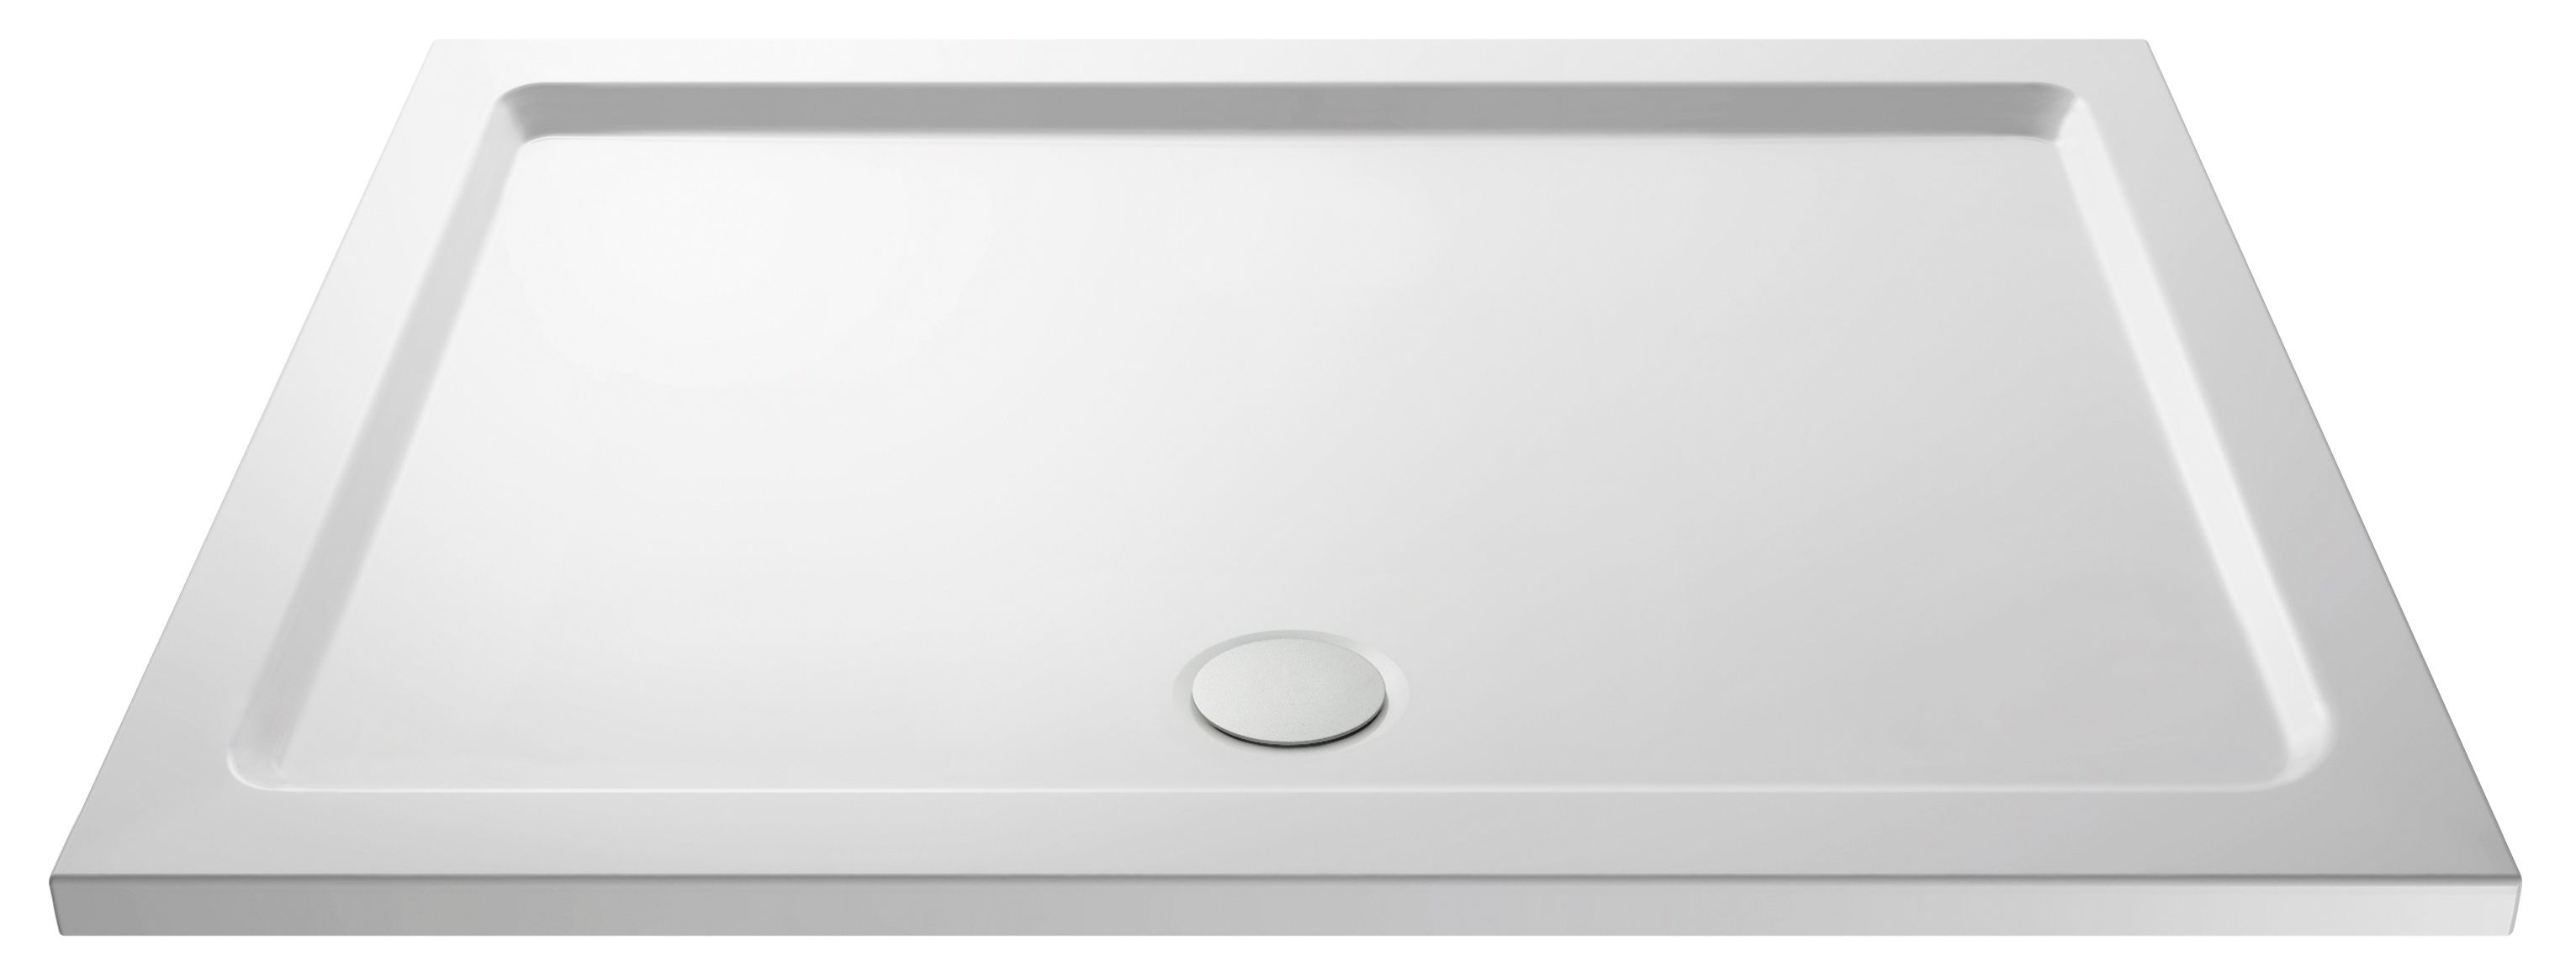 Nuie Shower Trays White Contemporary Rectangular Tray 1400x900mm - NTP034 